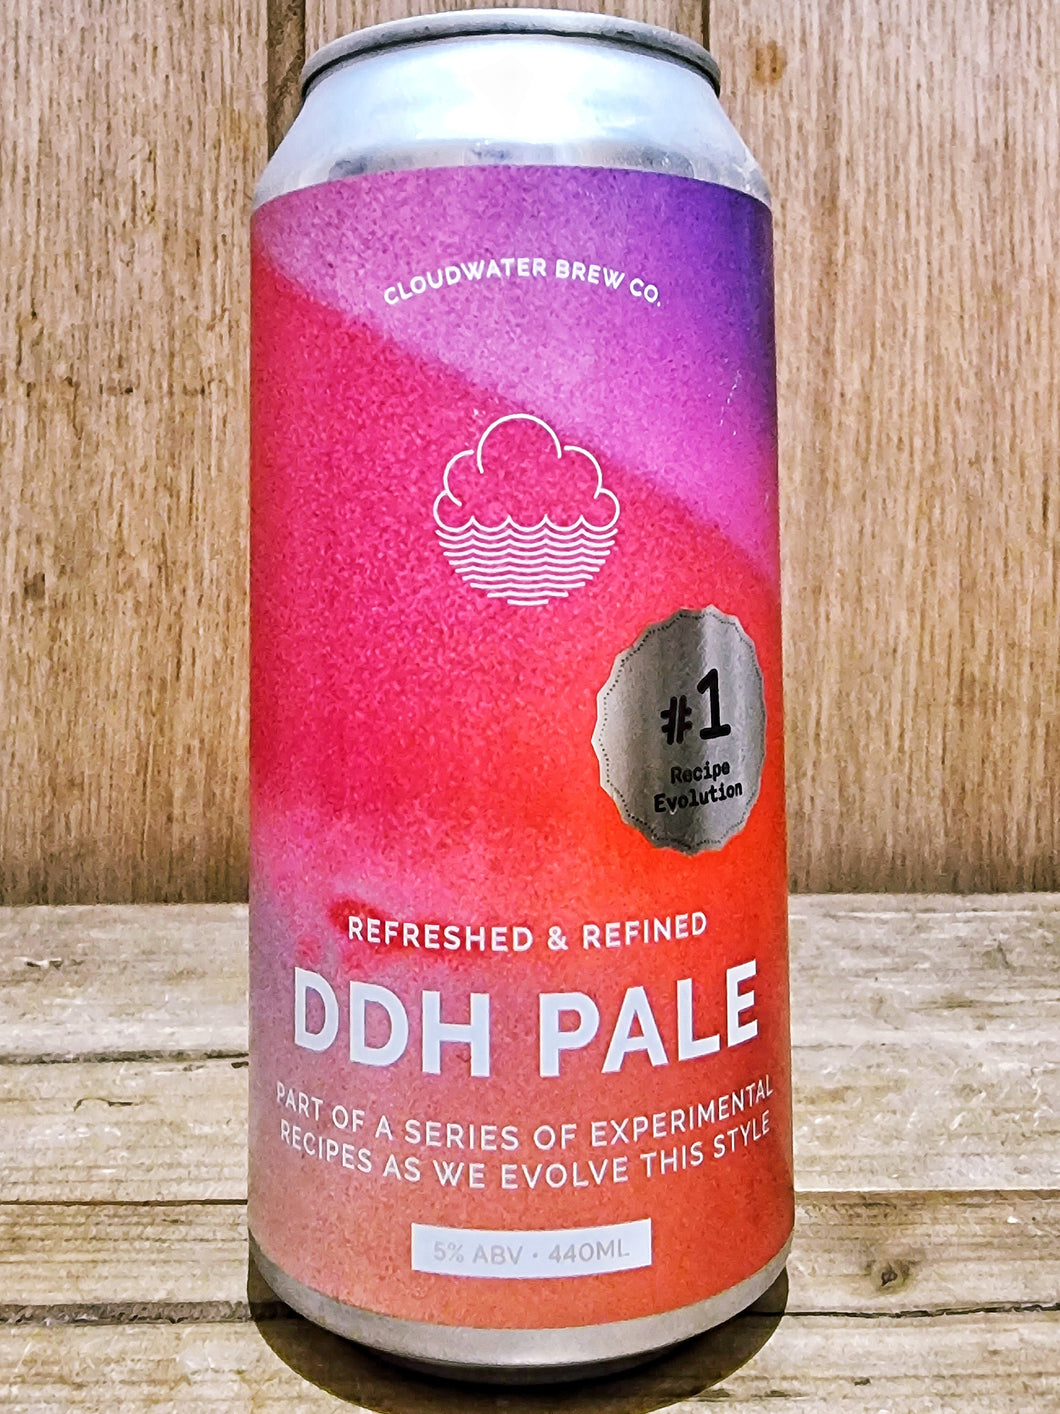 Cloudwater - DDH Pale #1